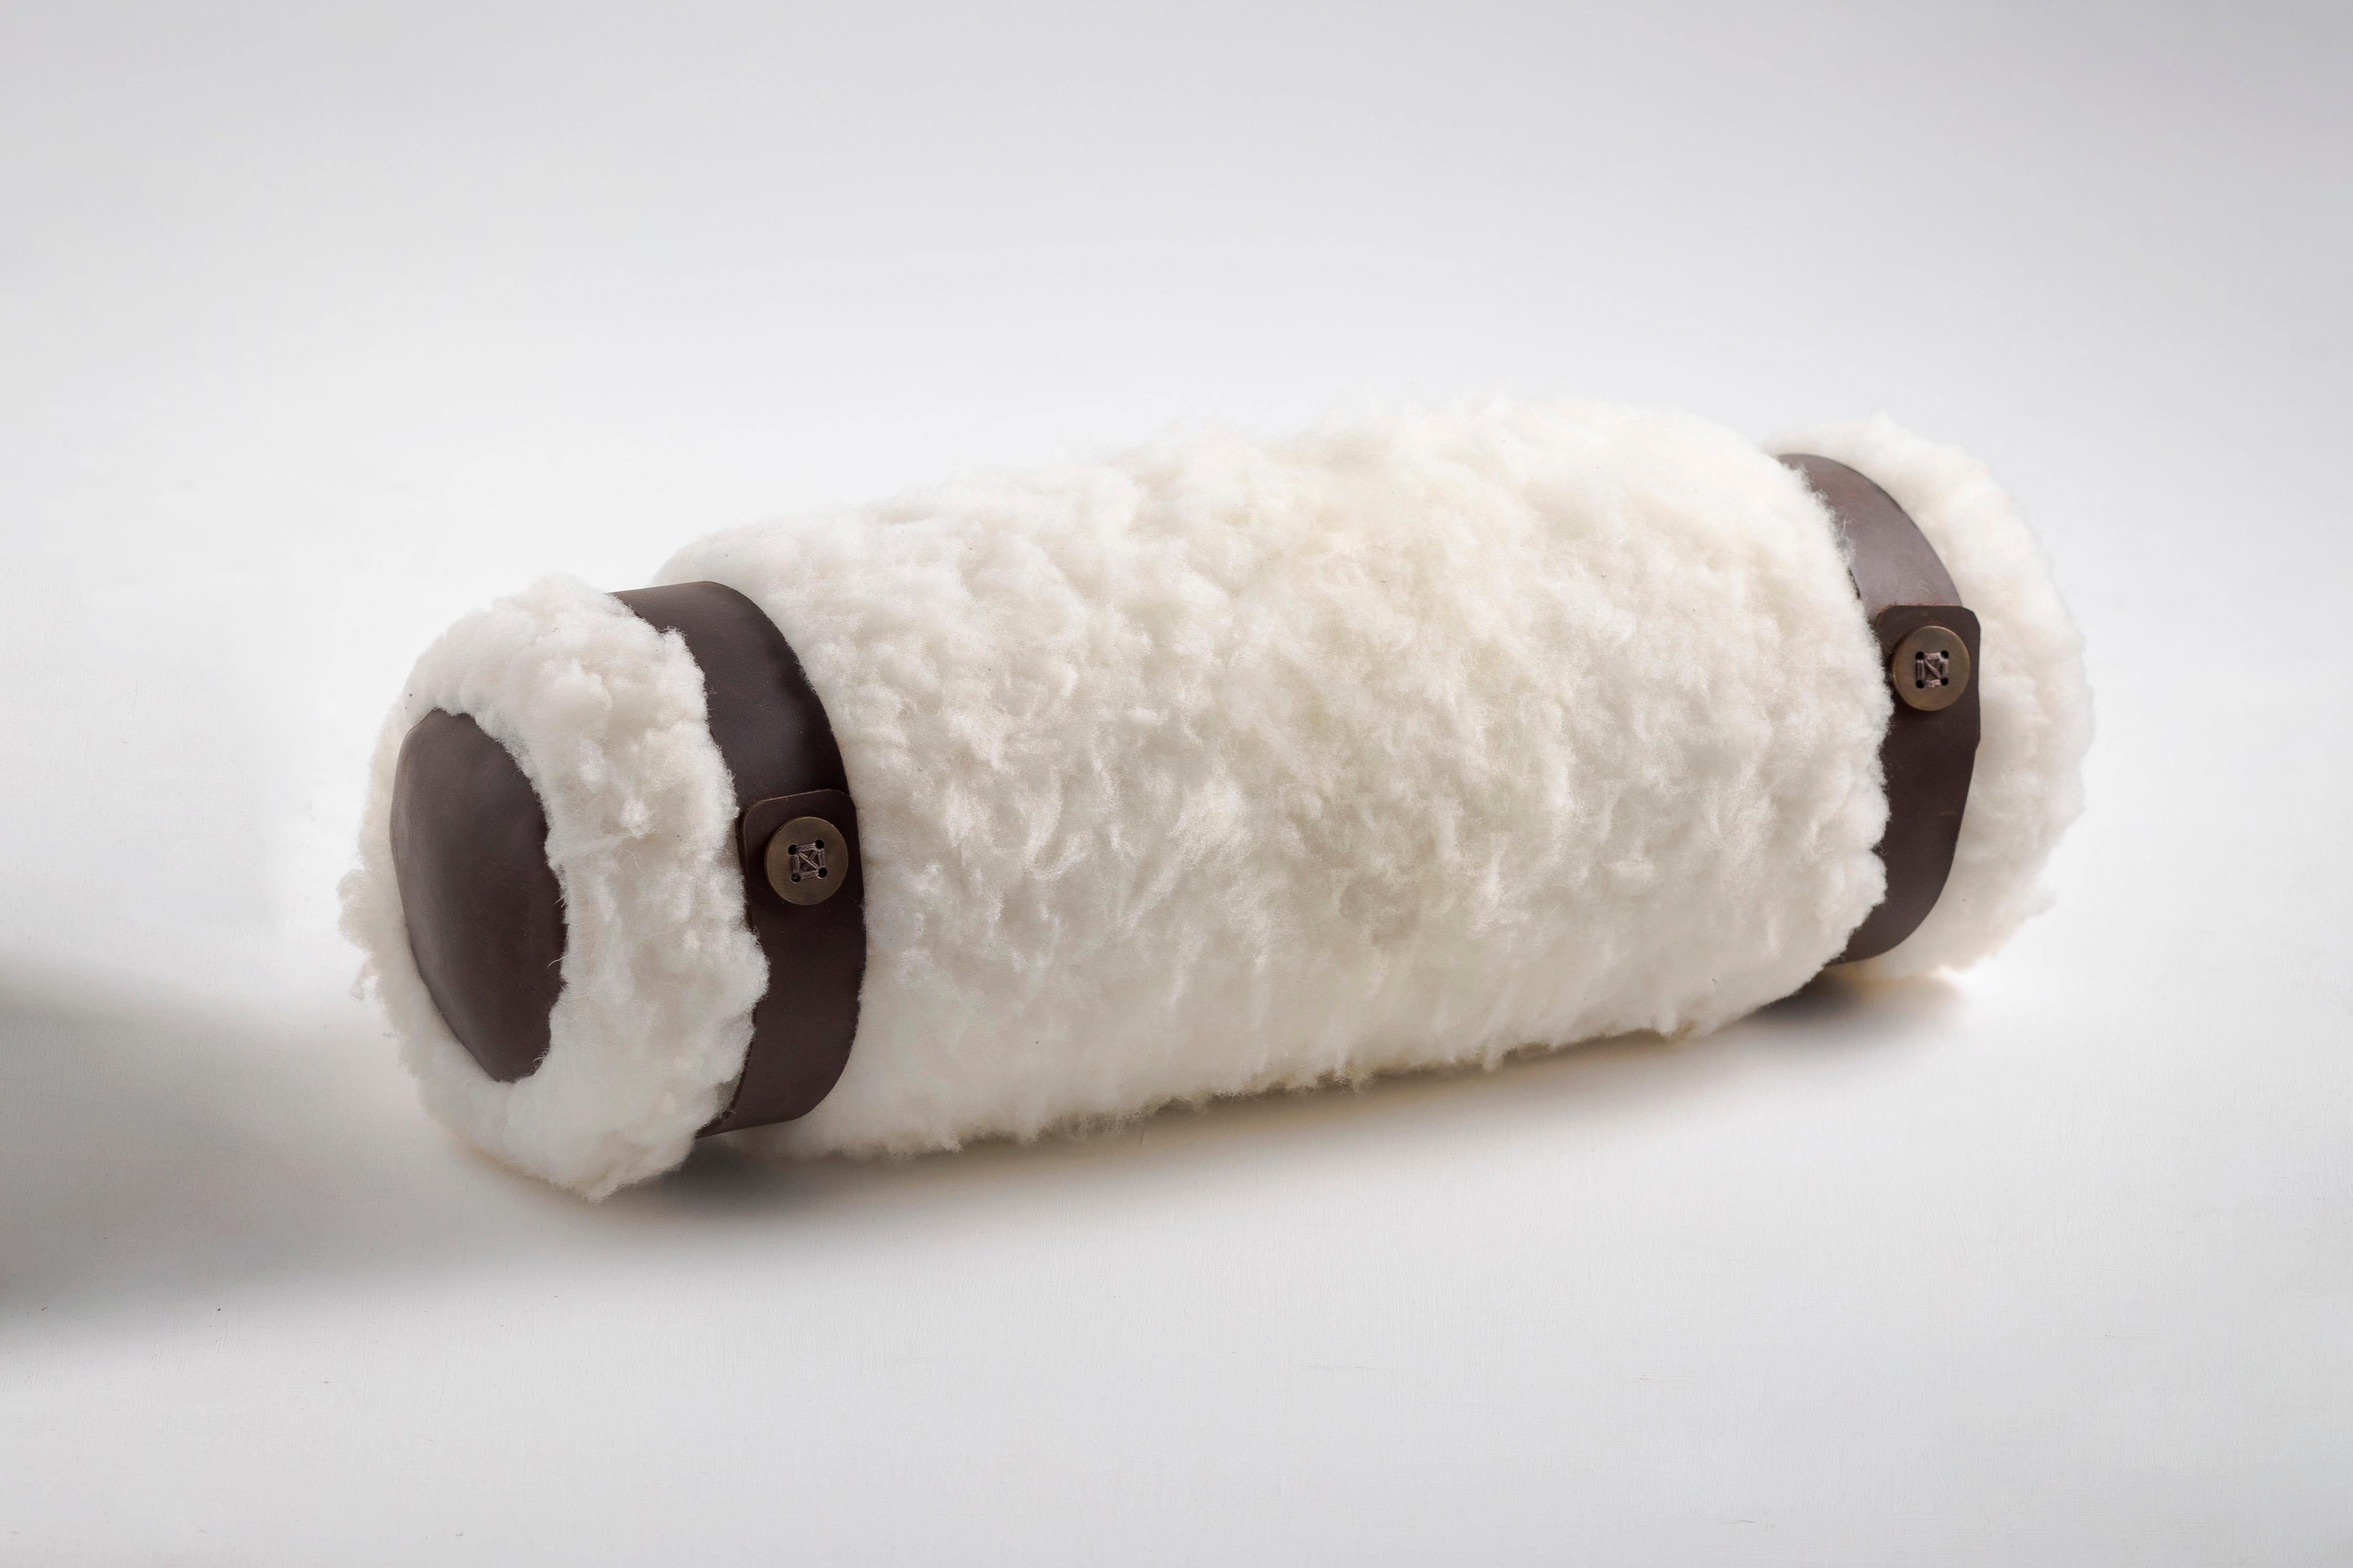 Decorative bolster pillow with artisanal sheepskin from Cotacachi, Imbabura.

These decorative cushions are carefully hand-crafted with cotton embroidery and enriched with accents of sheep fur and hand stitched leather. They feature traditional